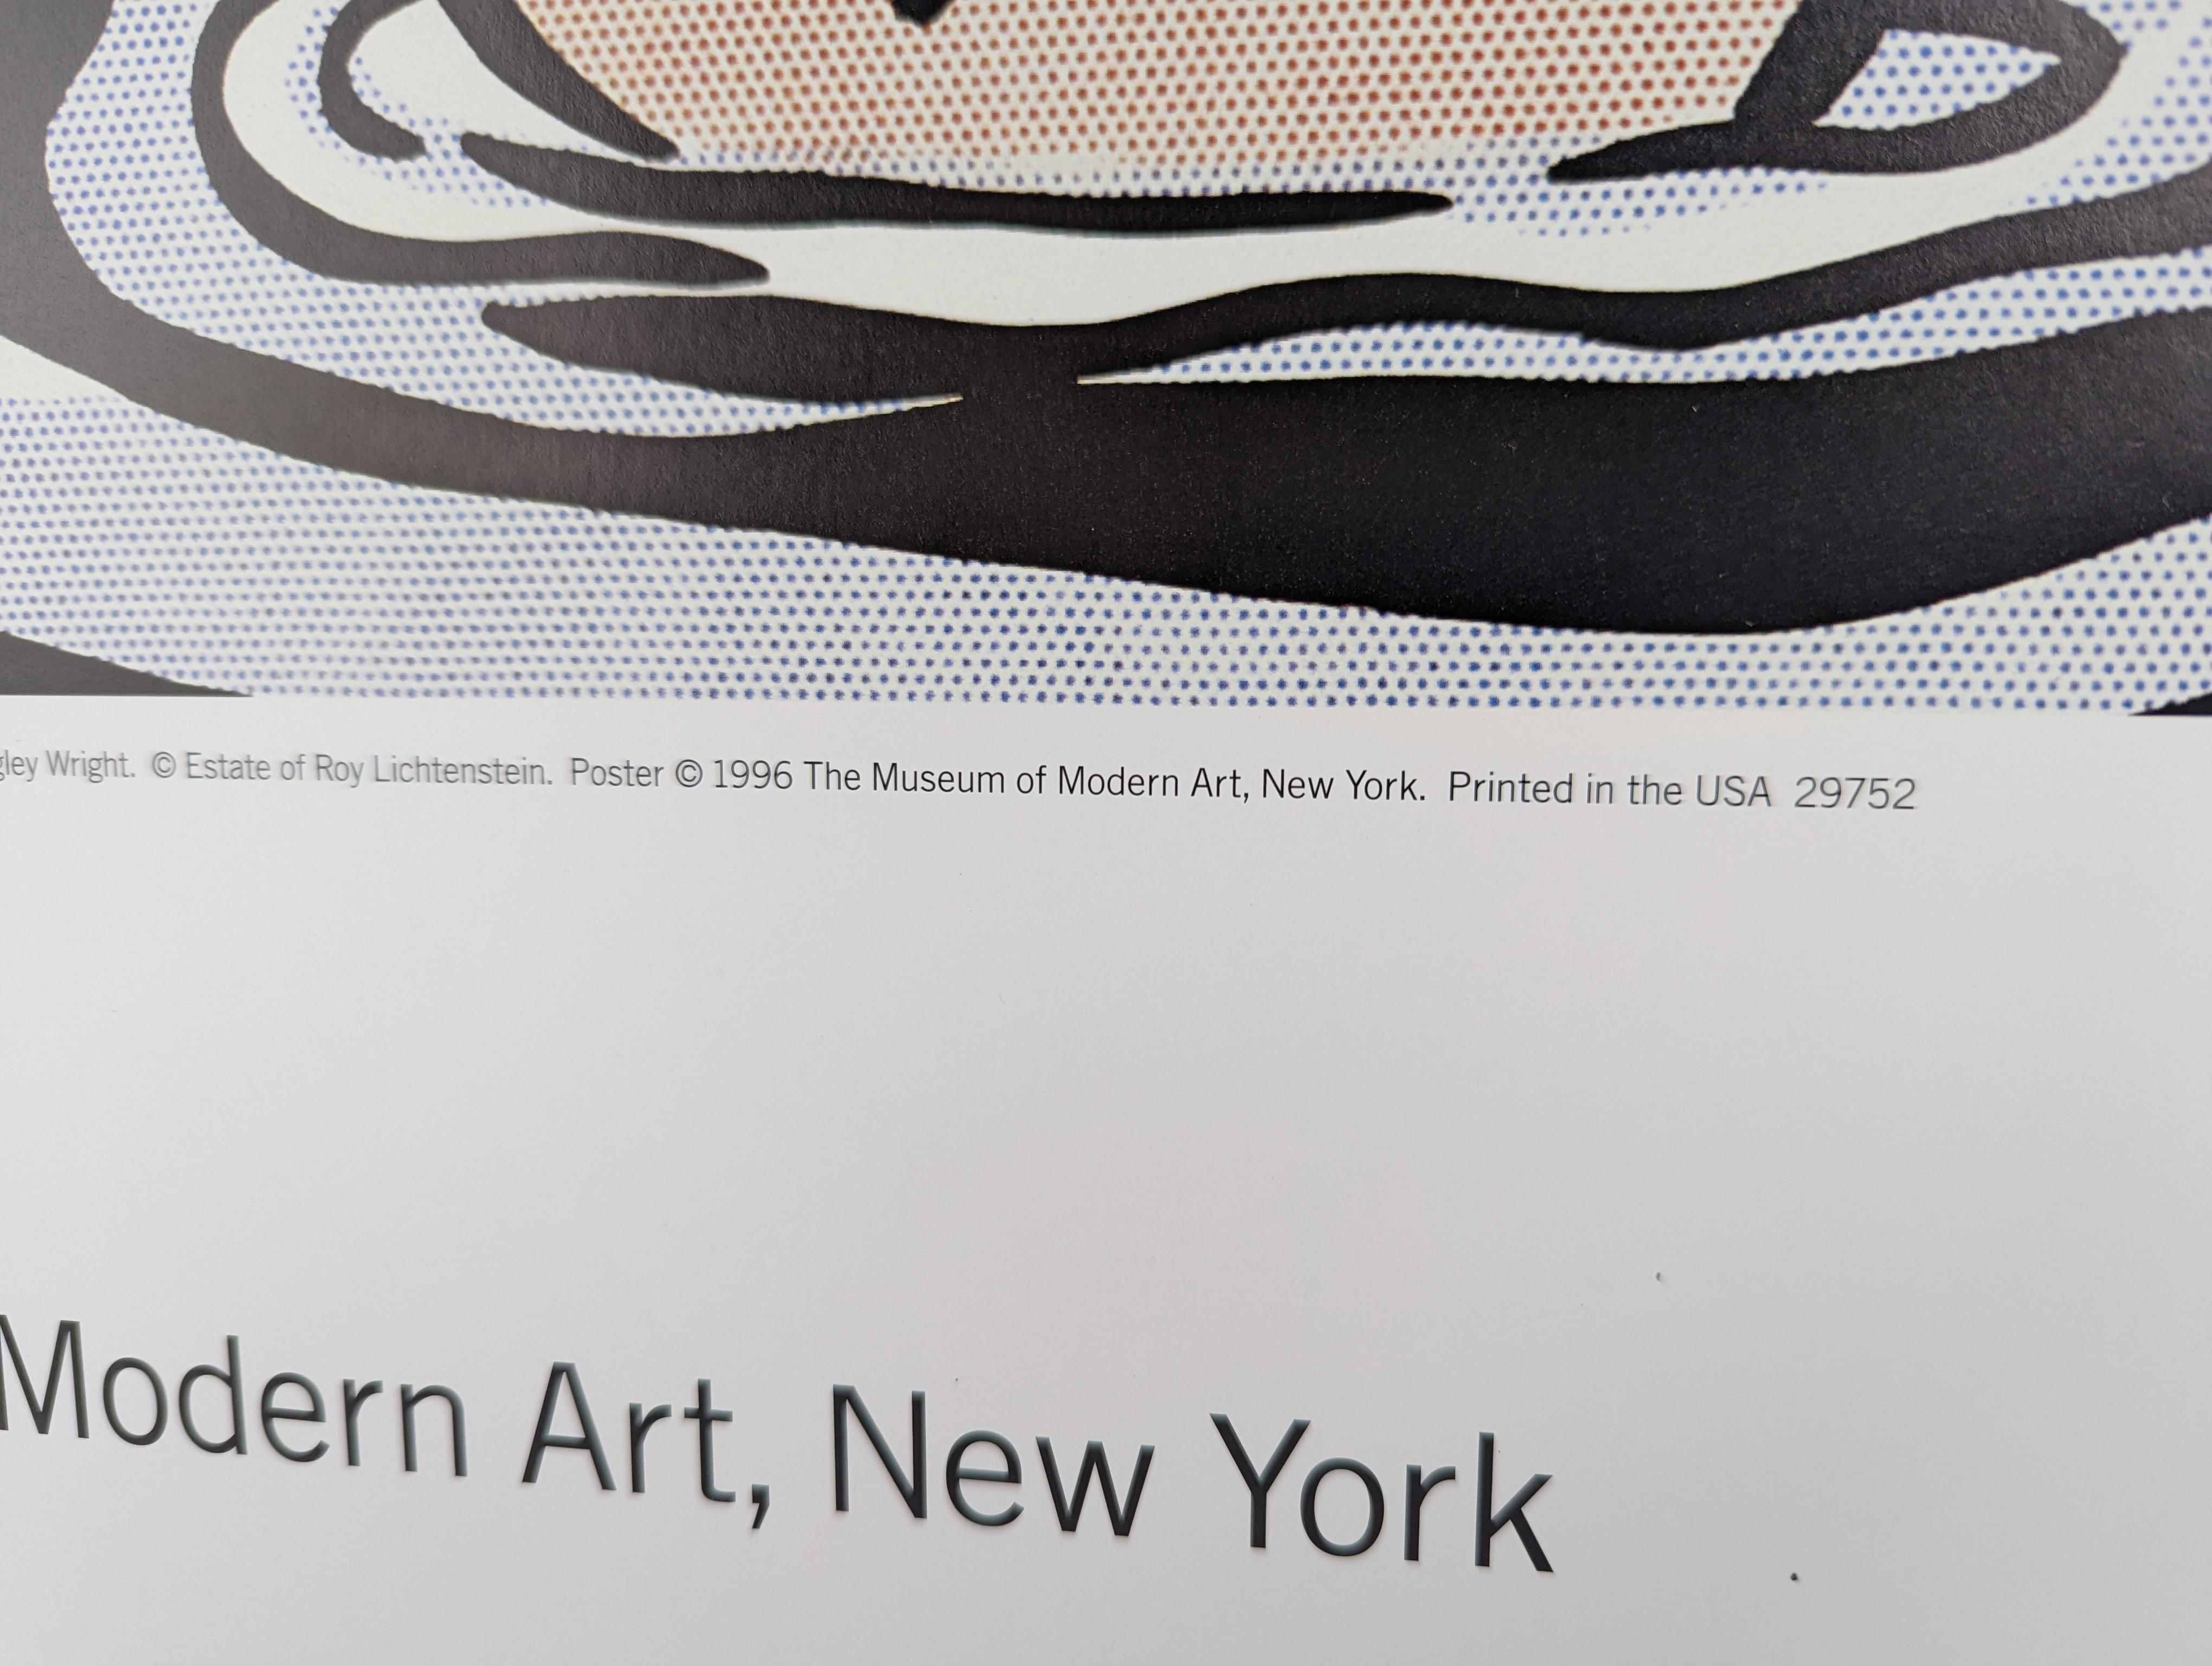 1996 poster released by the Museum of Modern Art, New York of Roy Lichtenstein's Drowning Girl. The work is attached to the bottom and is framed.